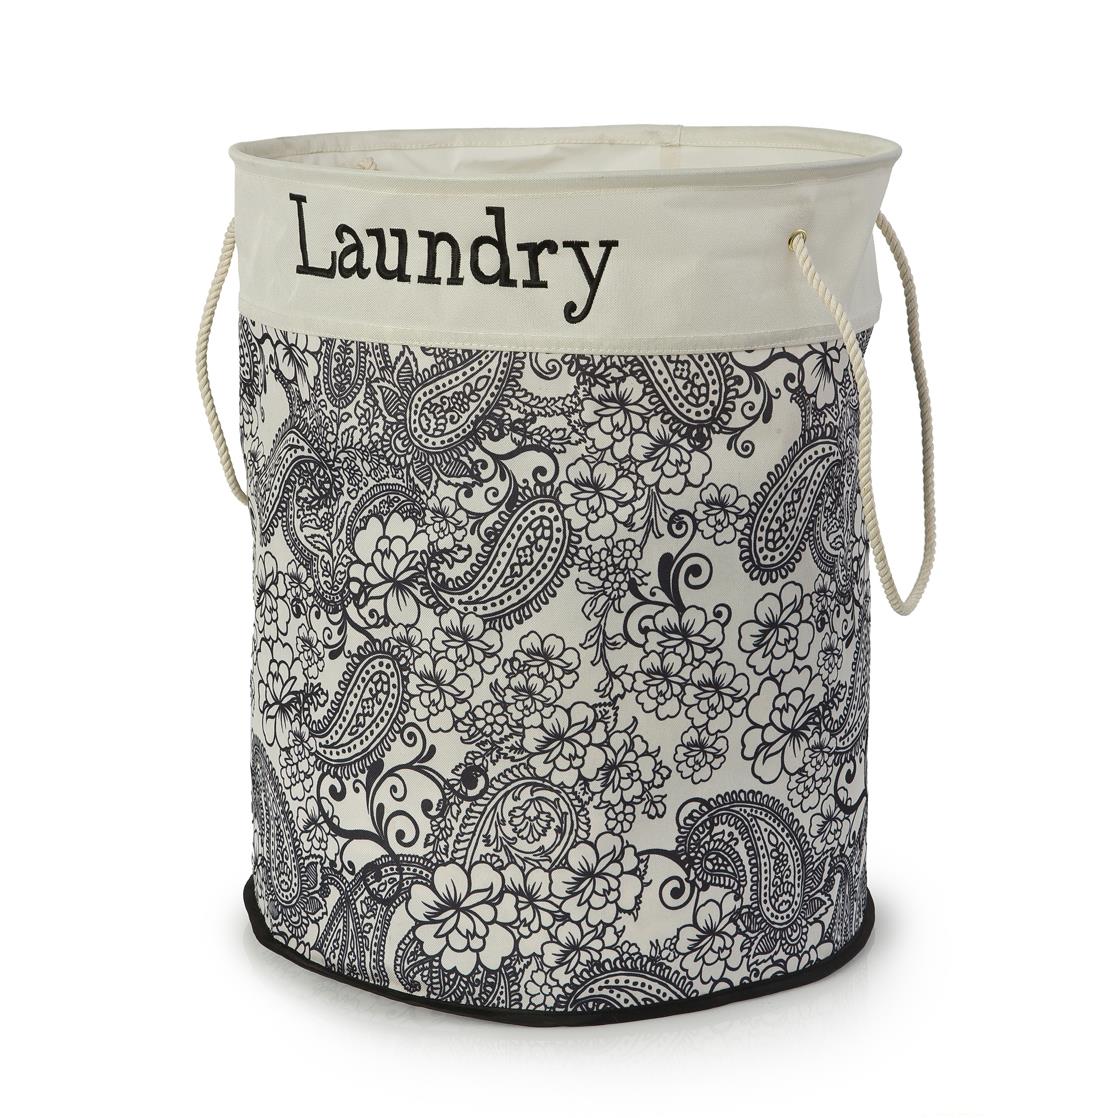 Round Black & White Floral Laundry Bin with Rope Handles